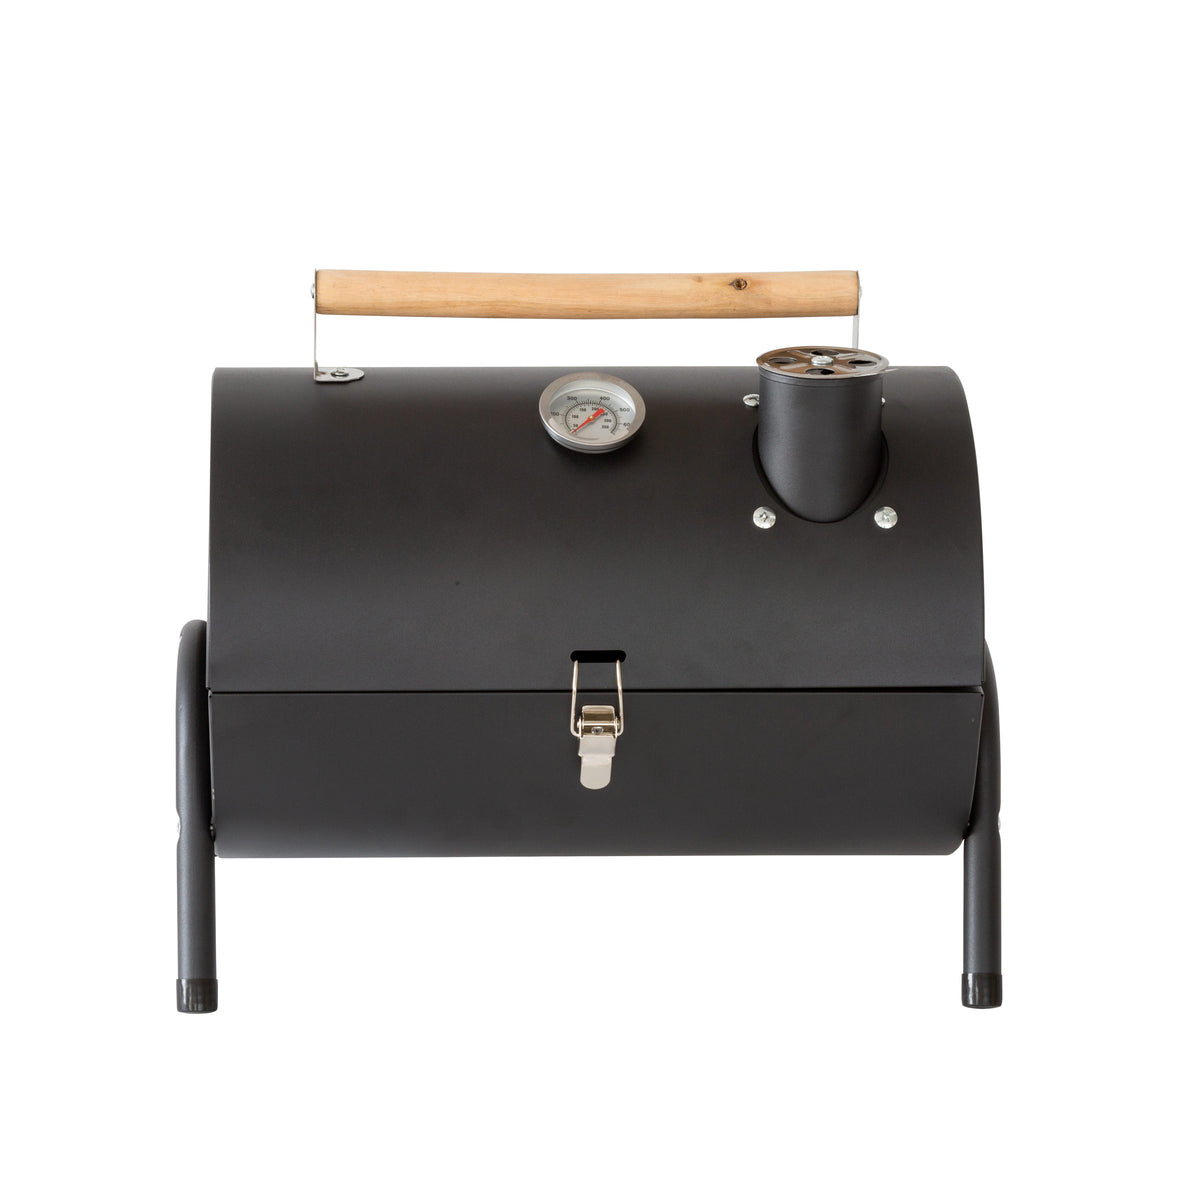 Charcoal Grill with Chimney and Temperature Gauge